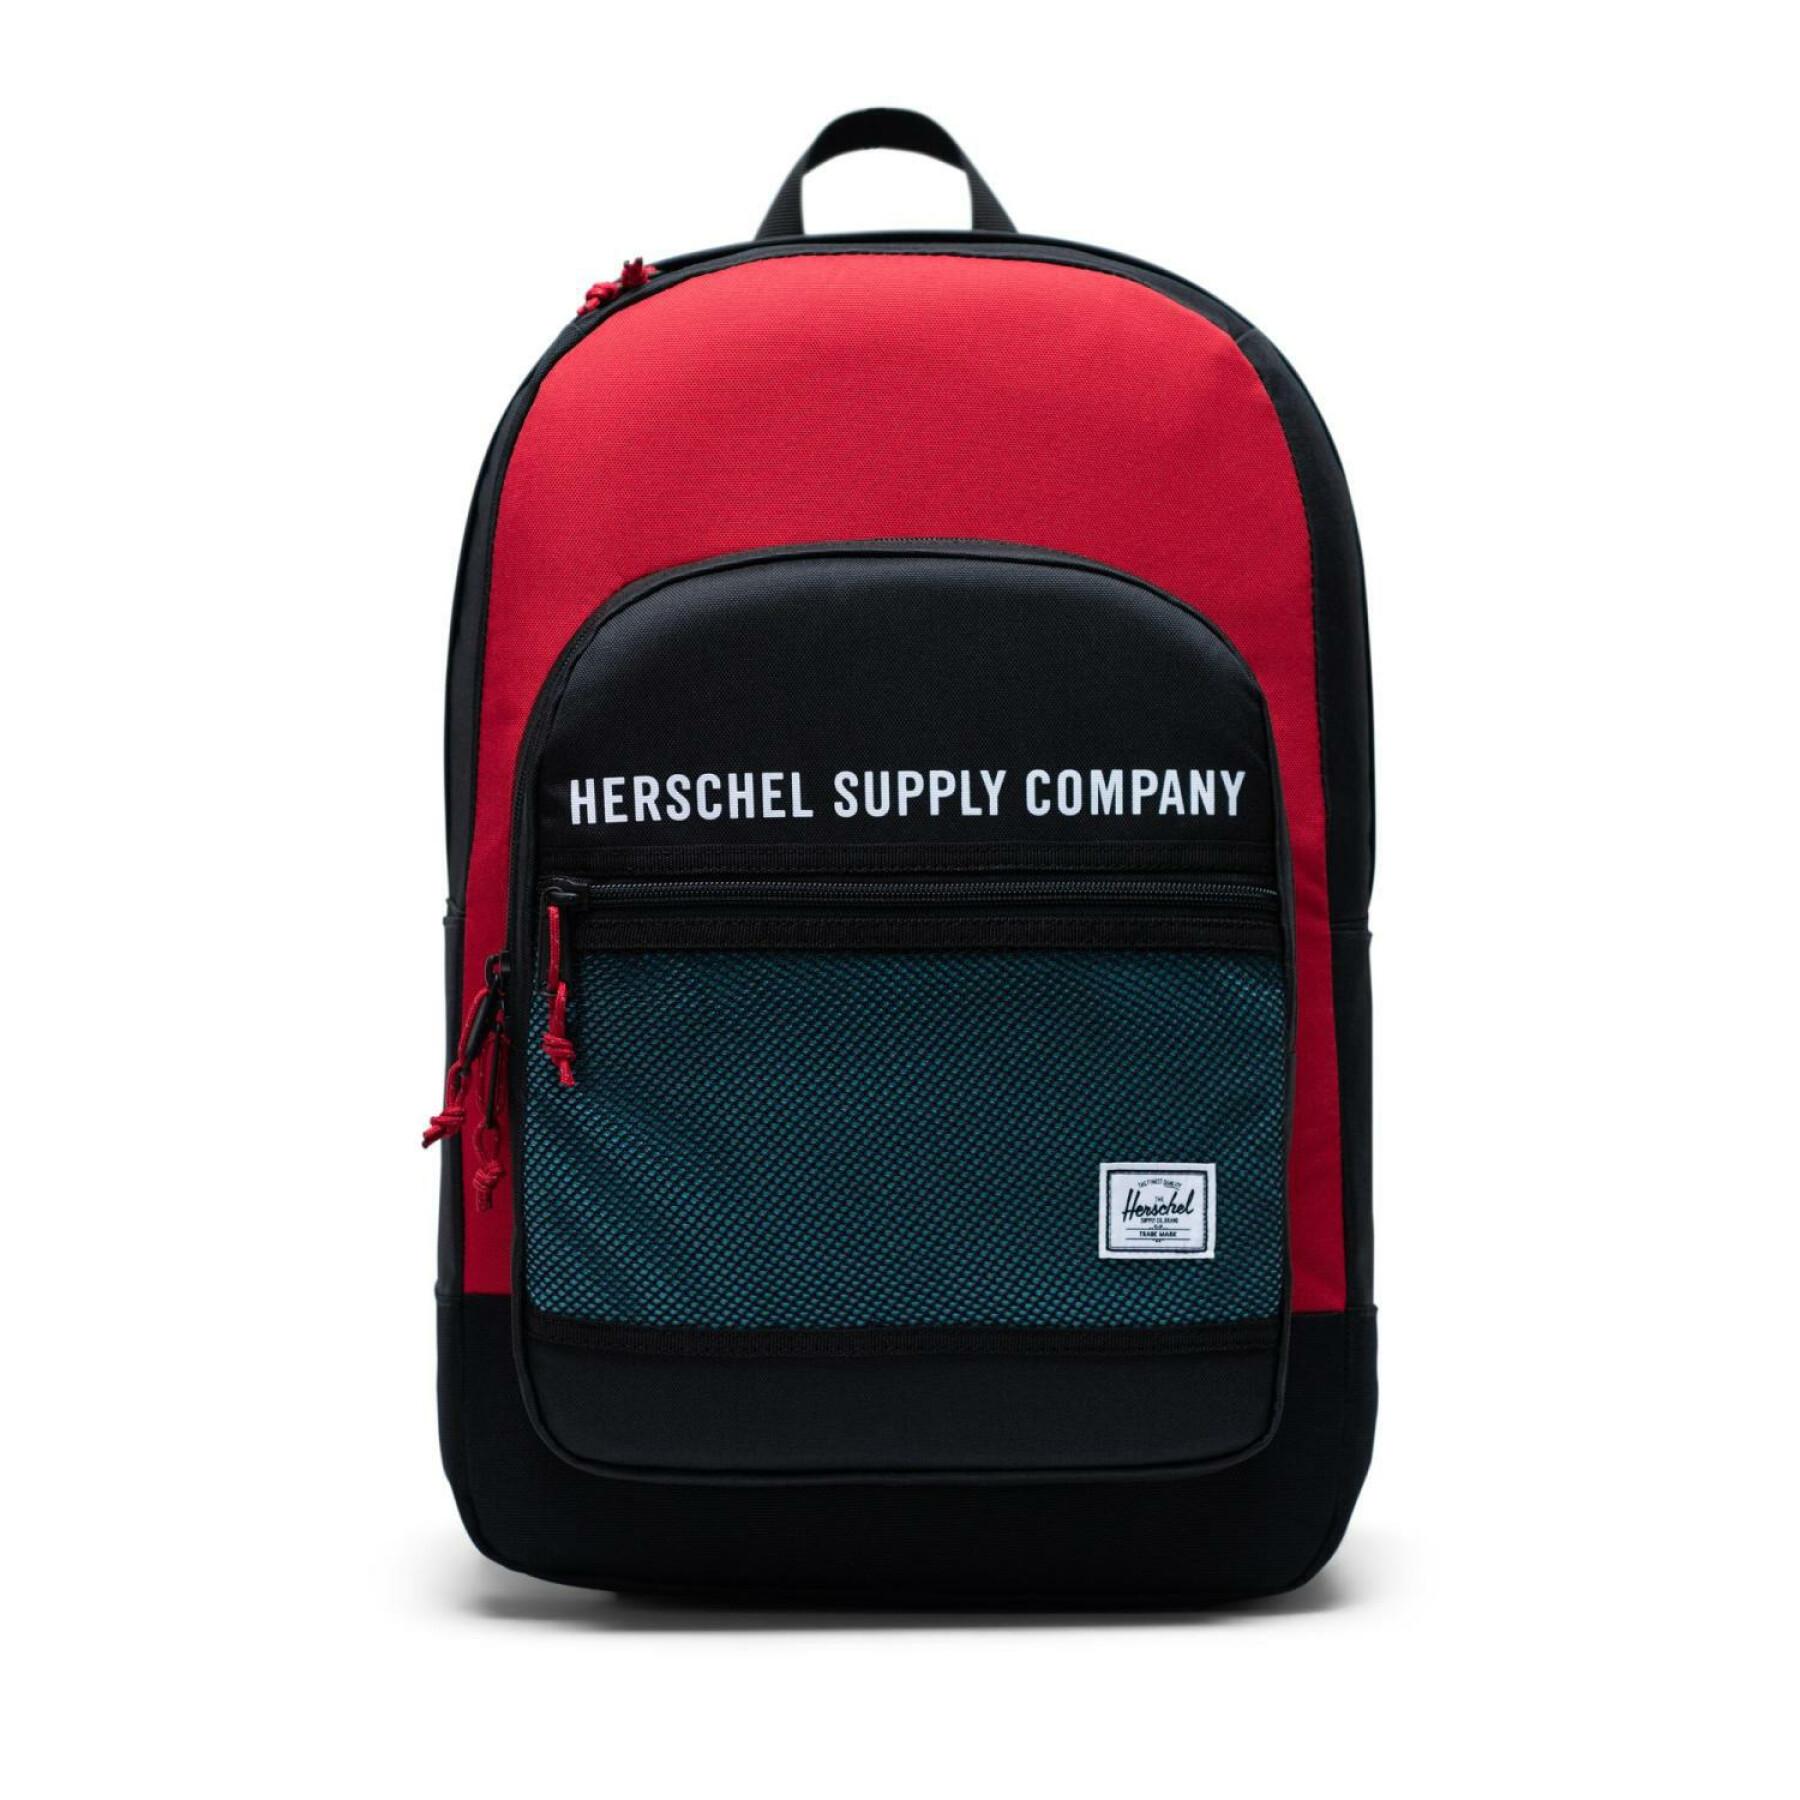 Backpack Herschel kaine black/red/bachelor butto